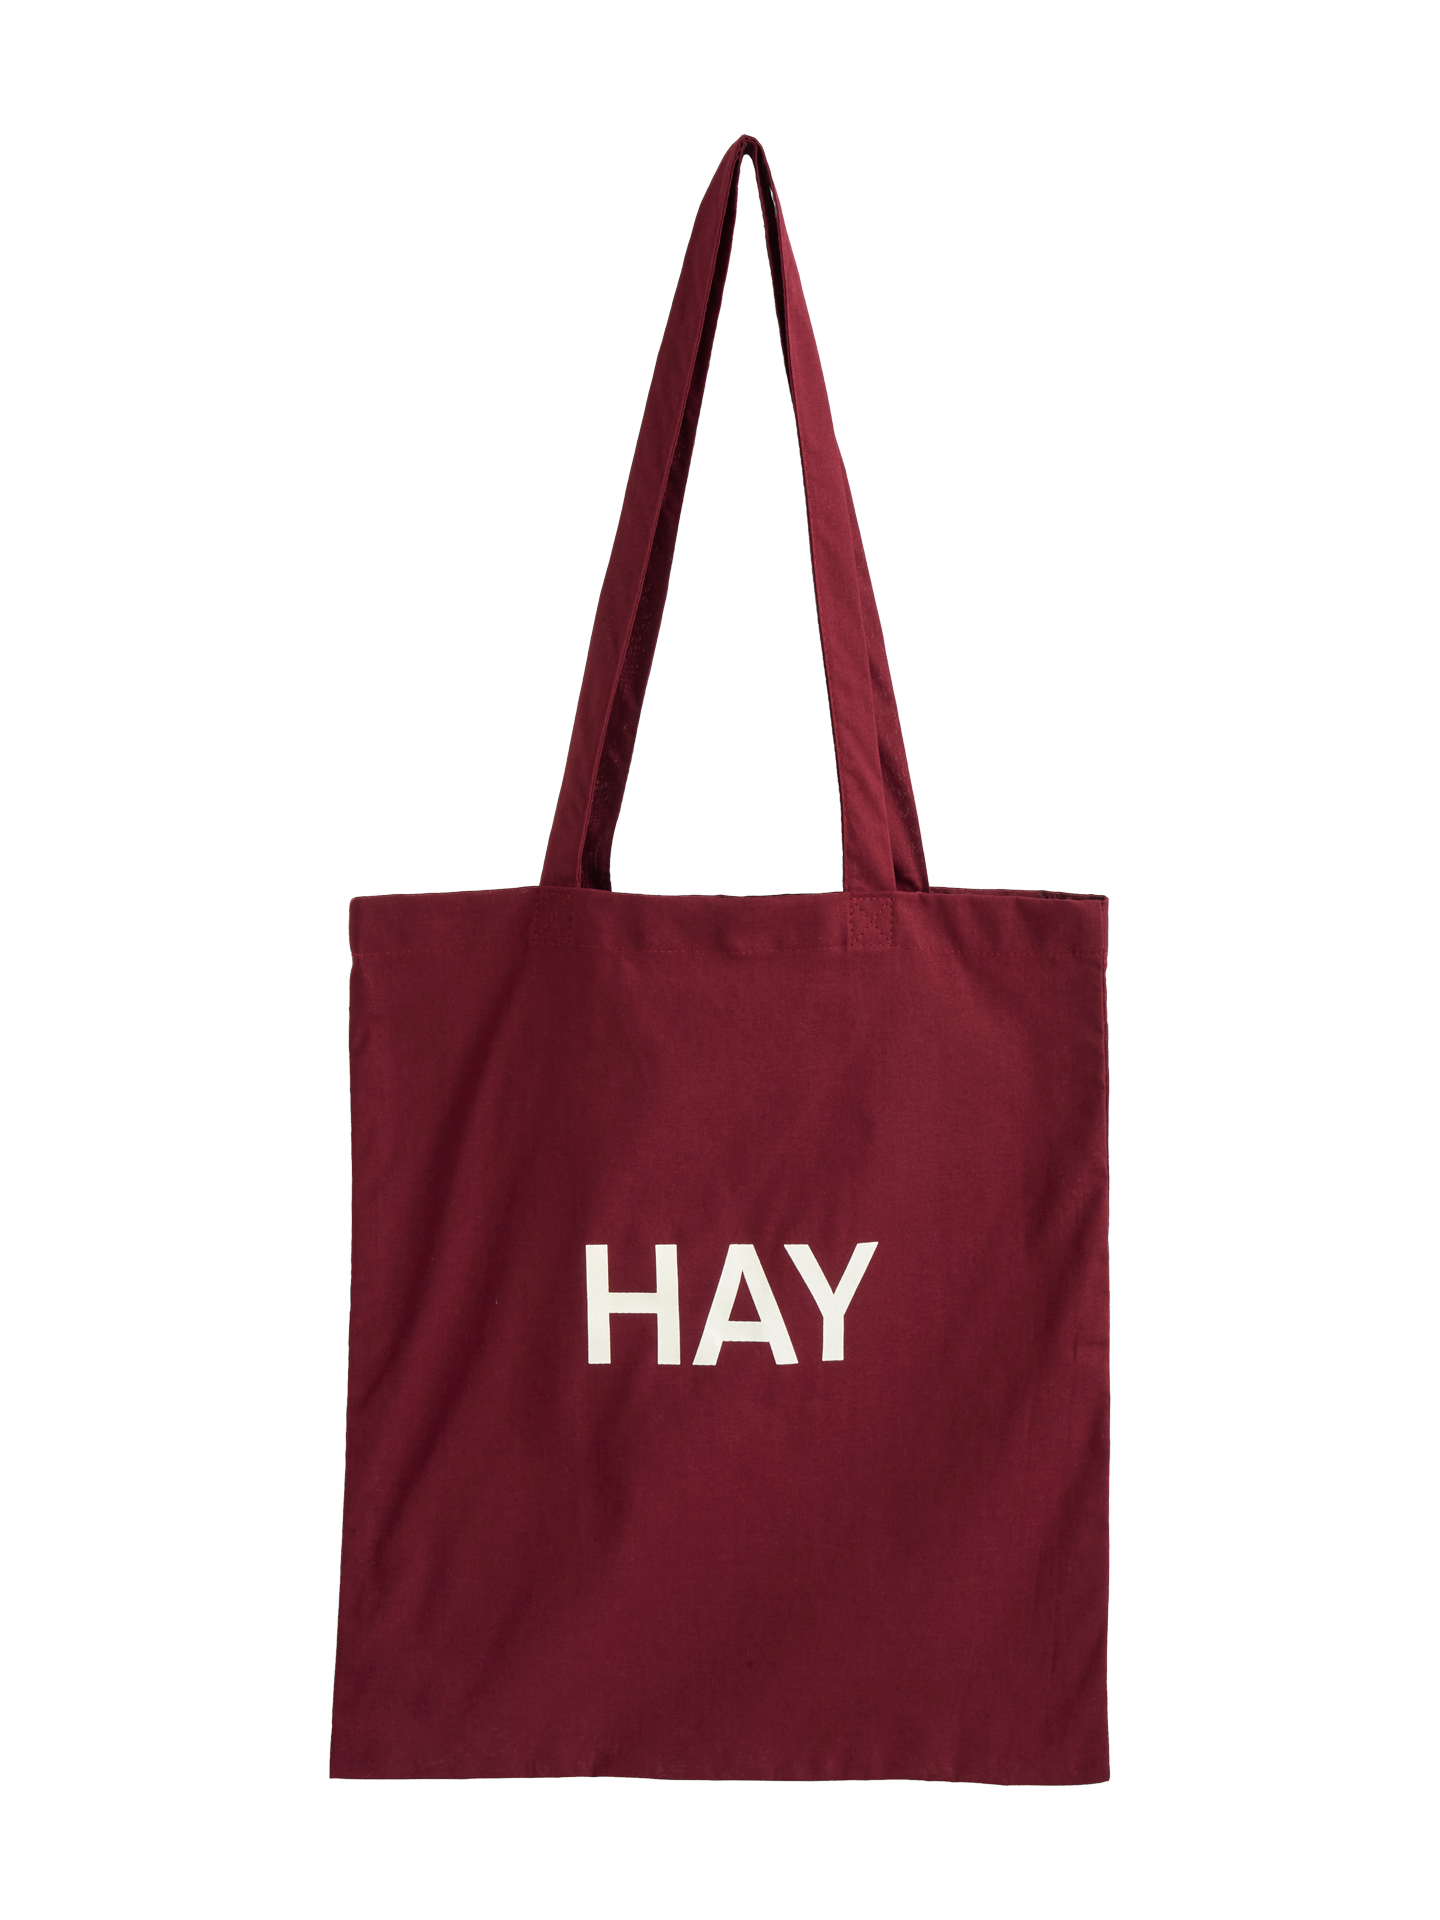 HAY Tote Bag (3 colours)